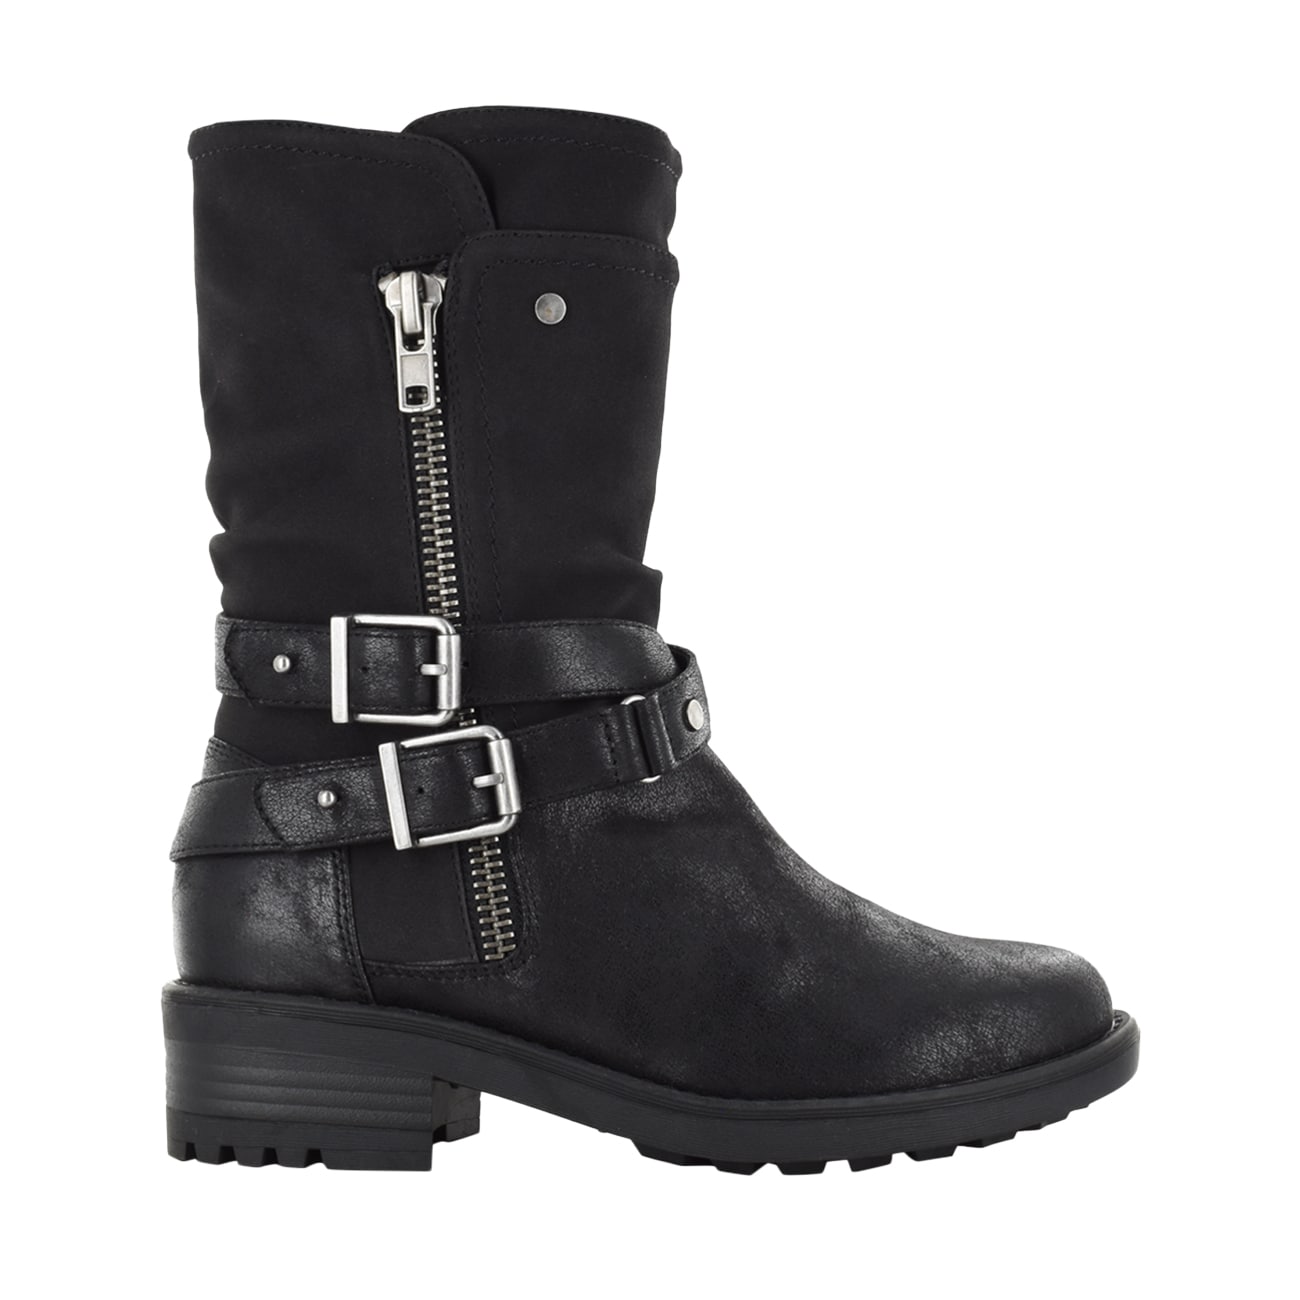 B52 By Bullboxer Mid Calf Boot | DSW Canada